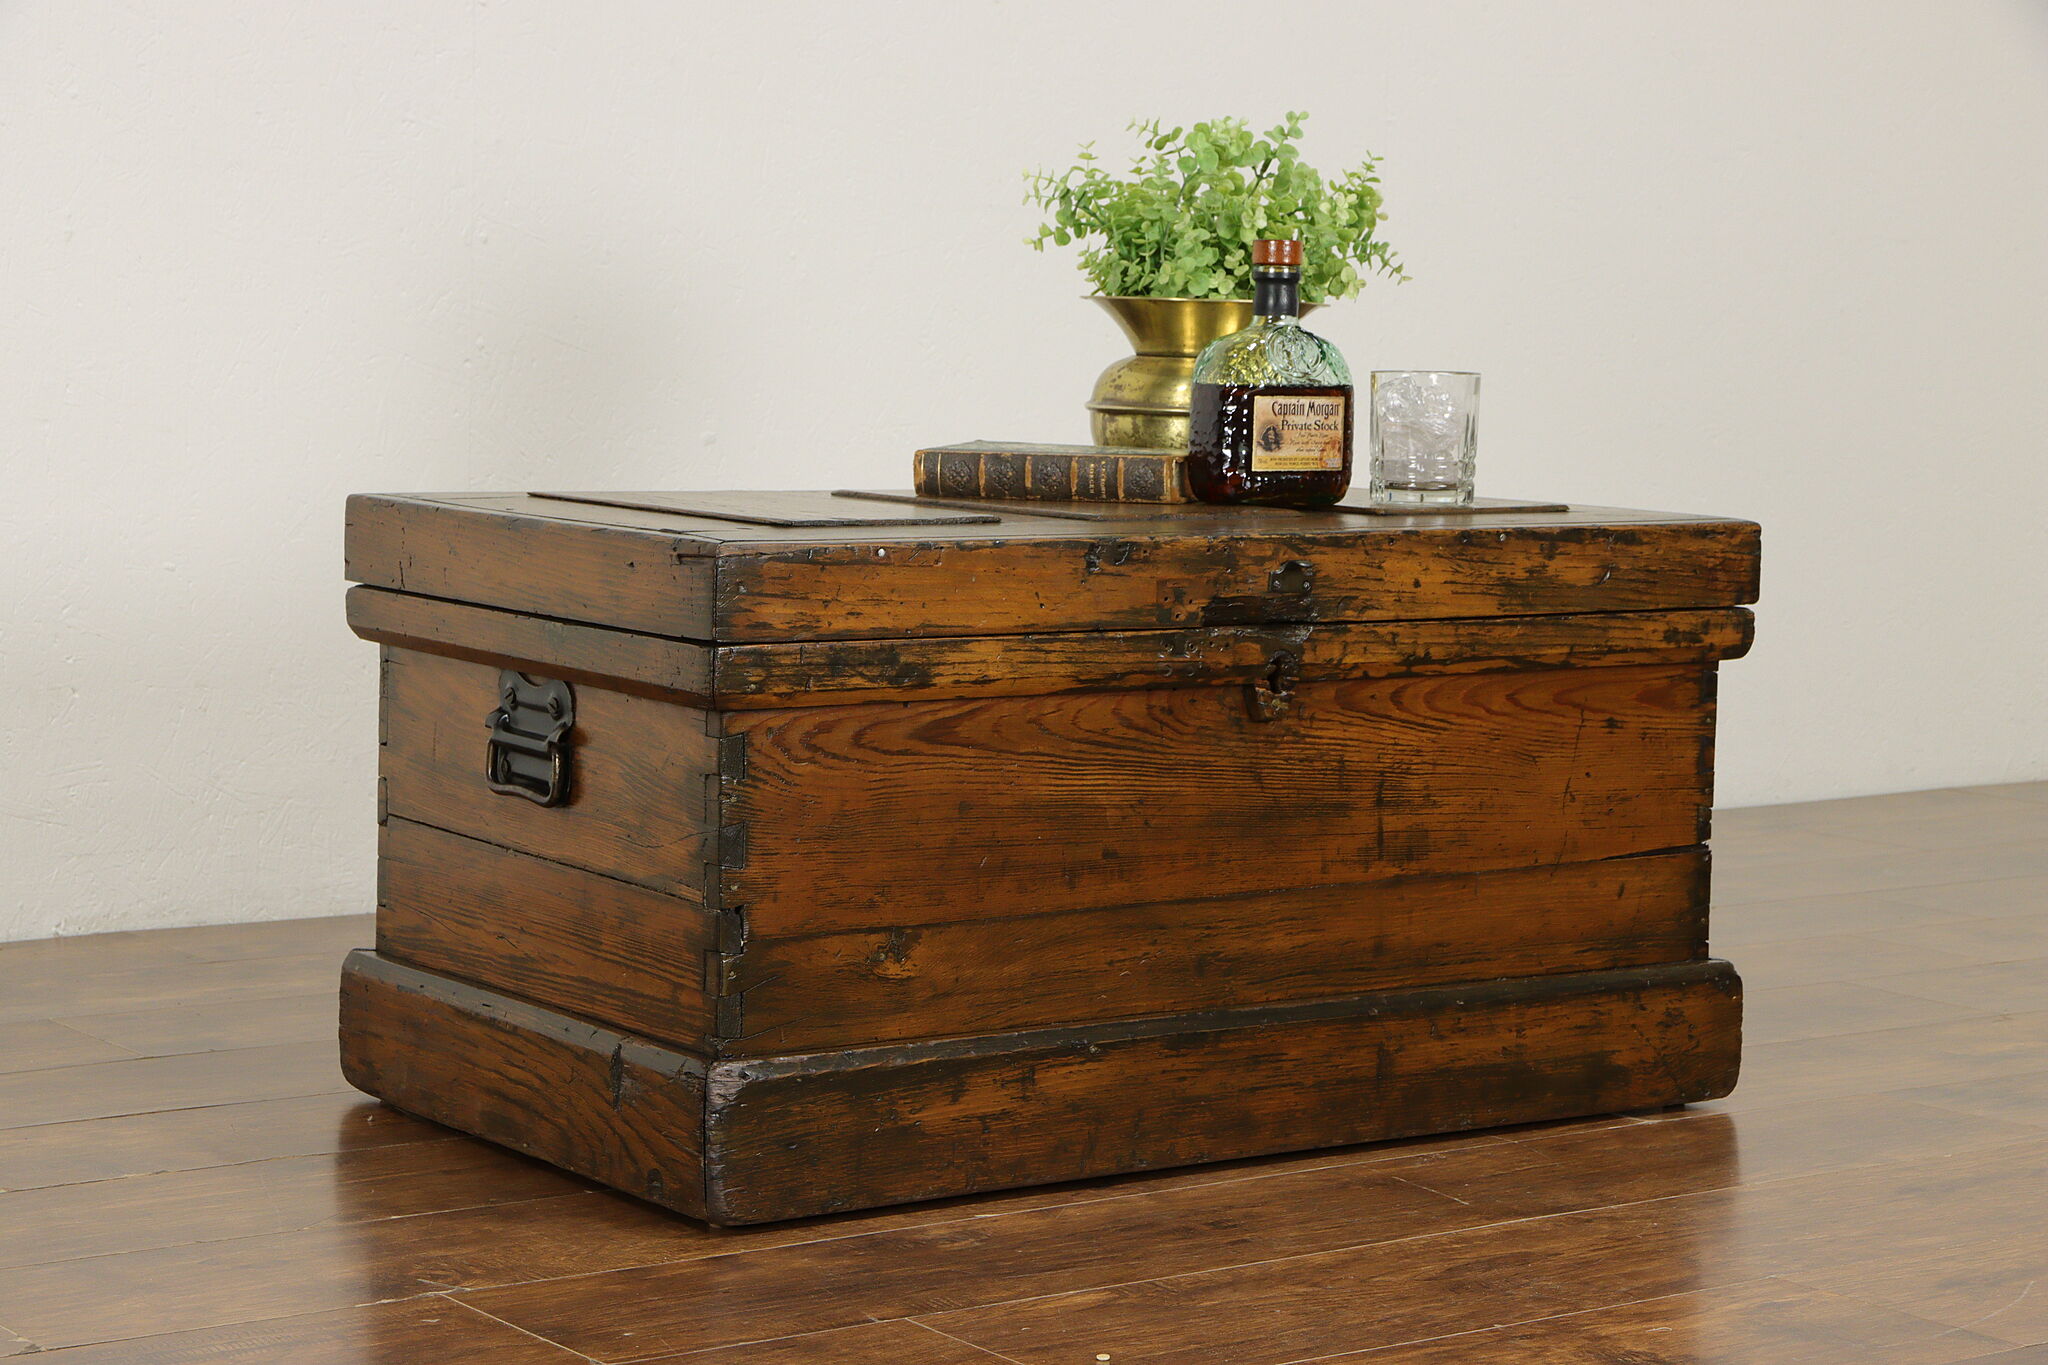 Carpenter Antique Country Pine Tool Chest, Farmhouse Coffee Table.